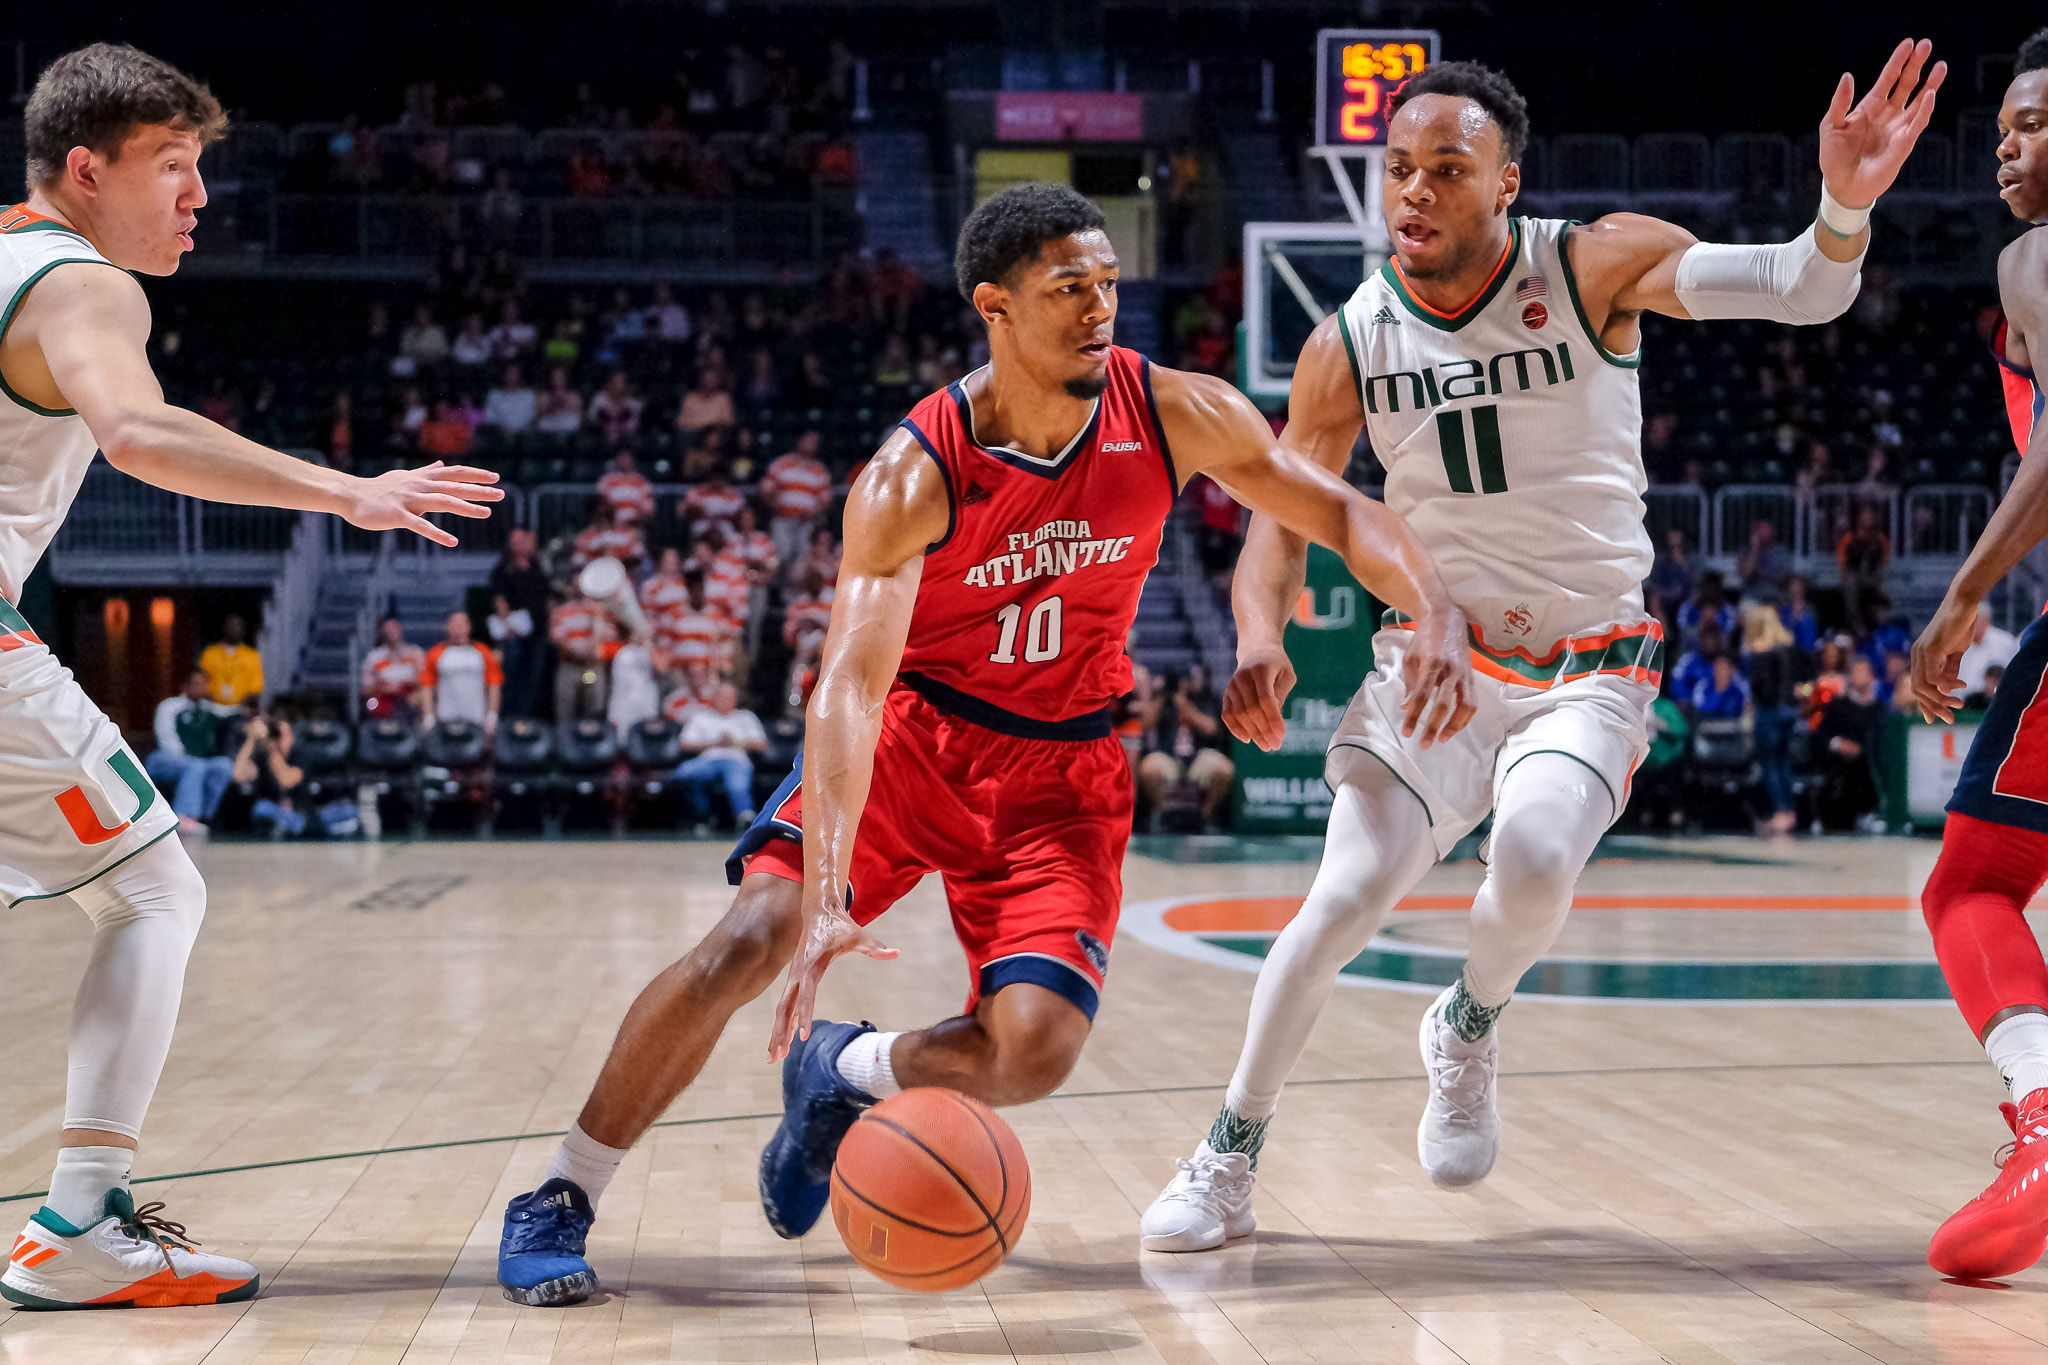 Men’s basketball FAU struggles on the road, suffers 20point blowout